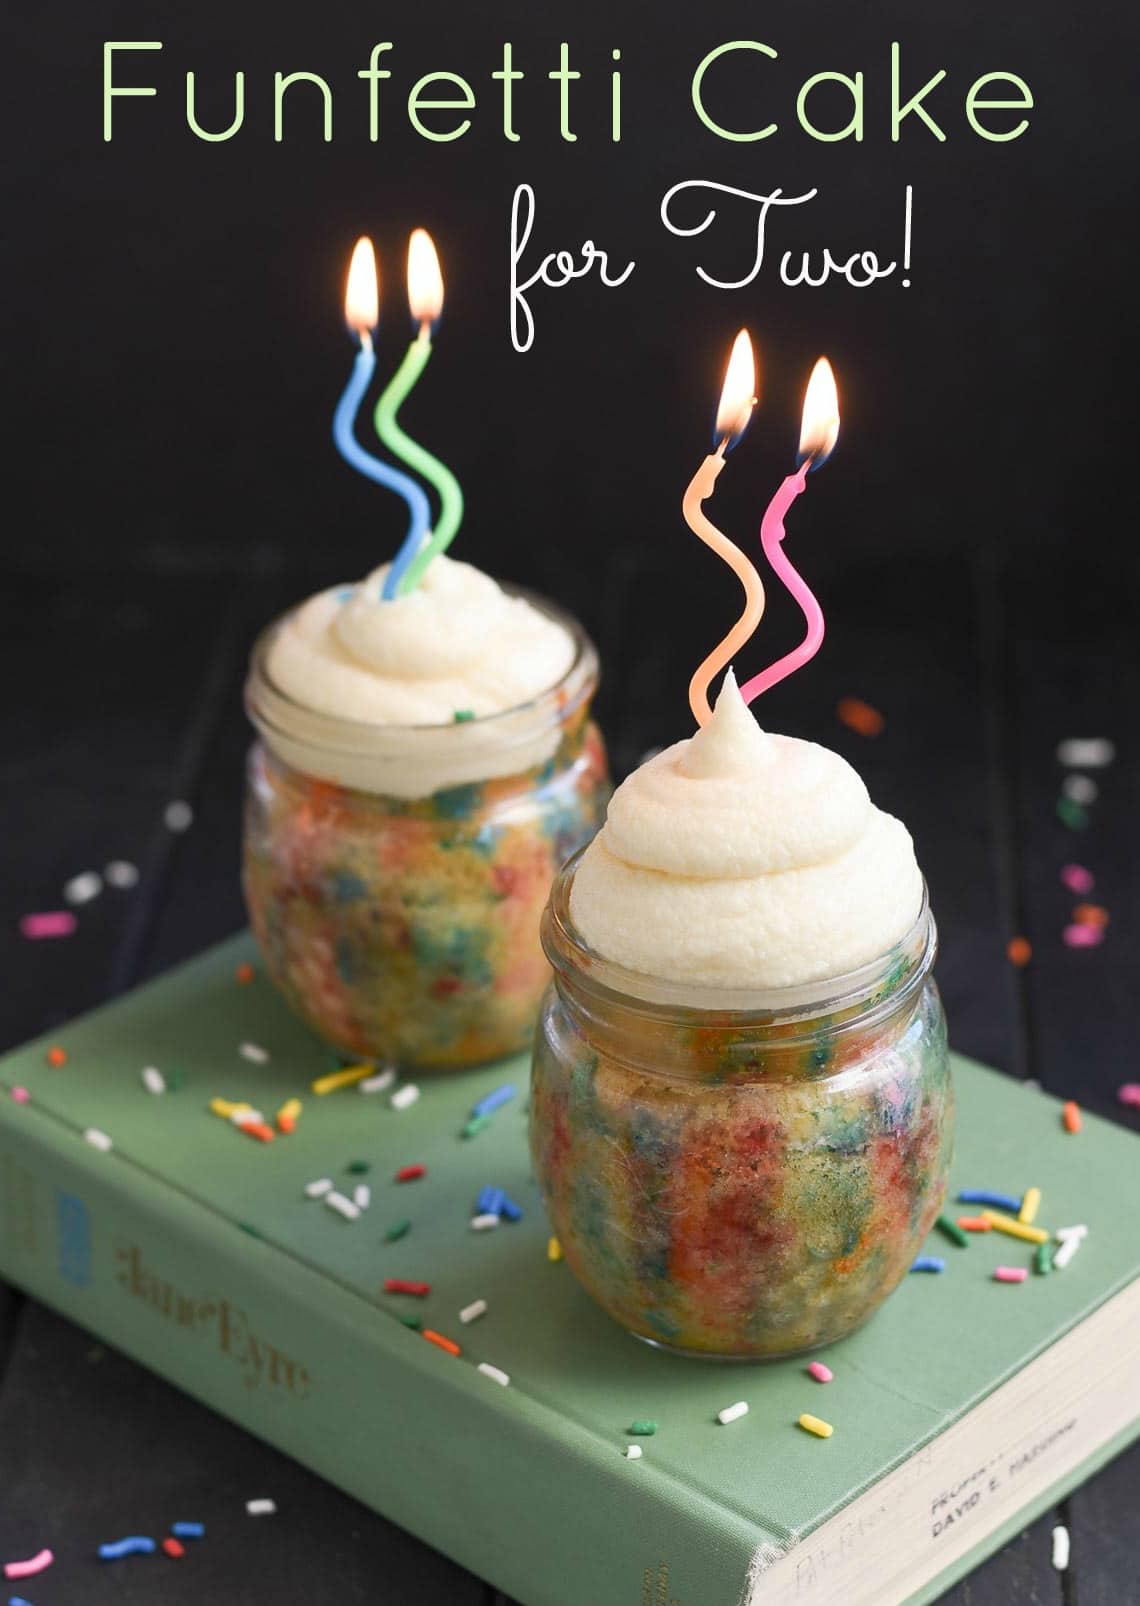 Funfetti Cake In Jars for TWO